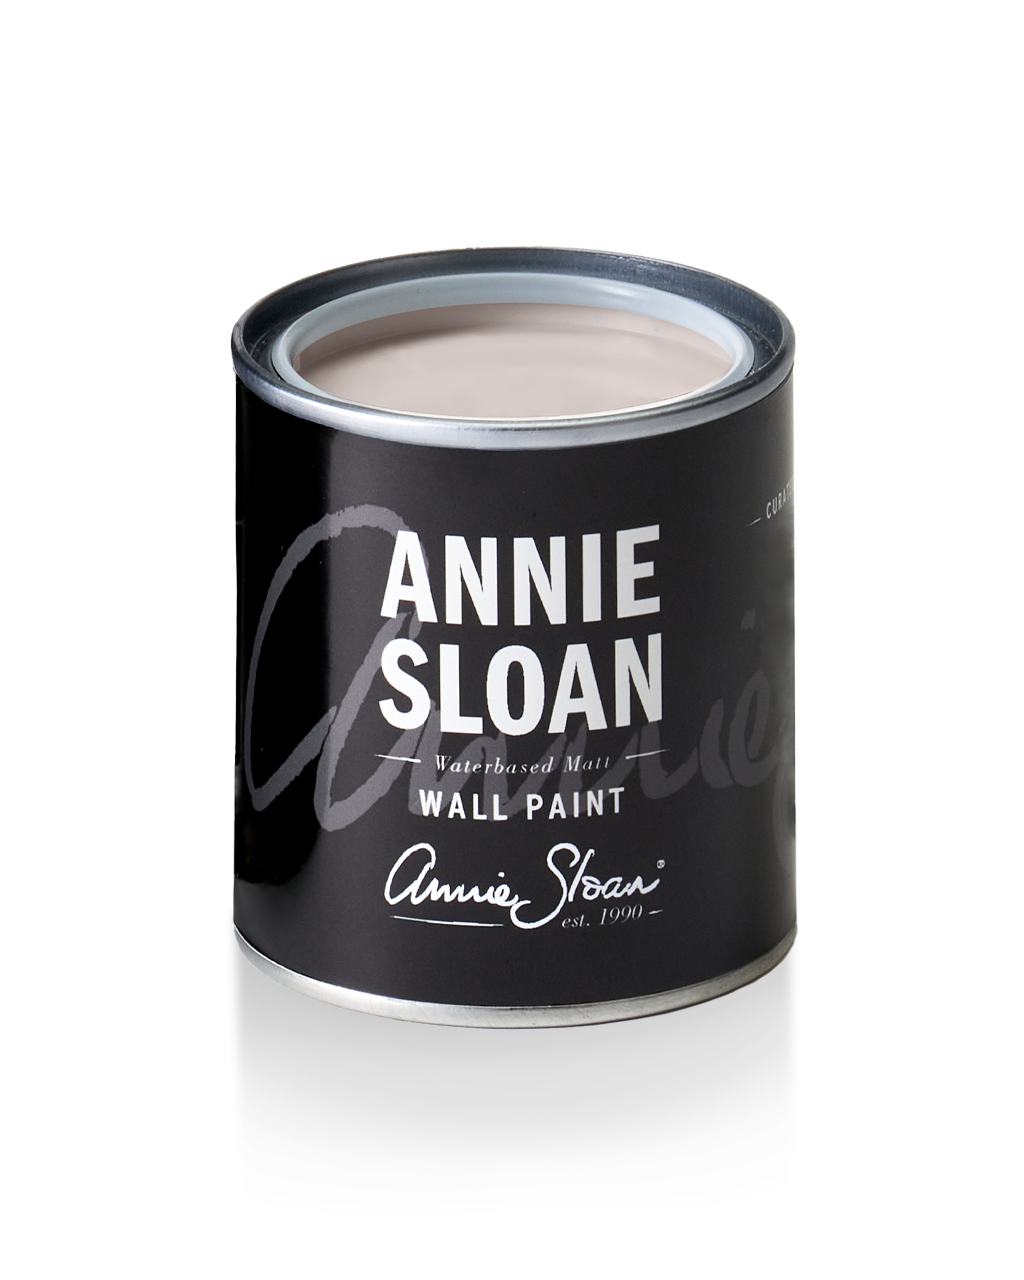 120ml tin of Adelphi wall paint by Annie Sloan